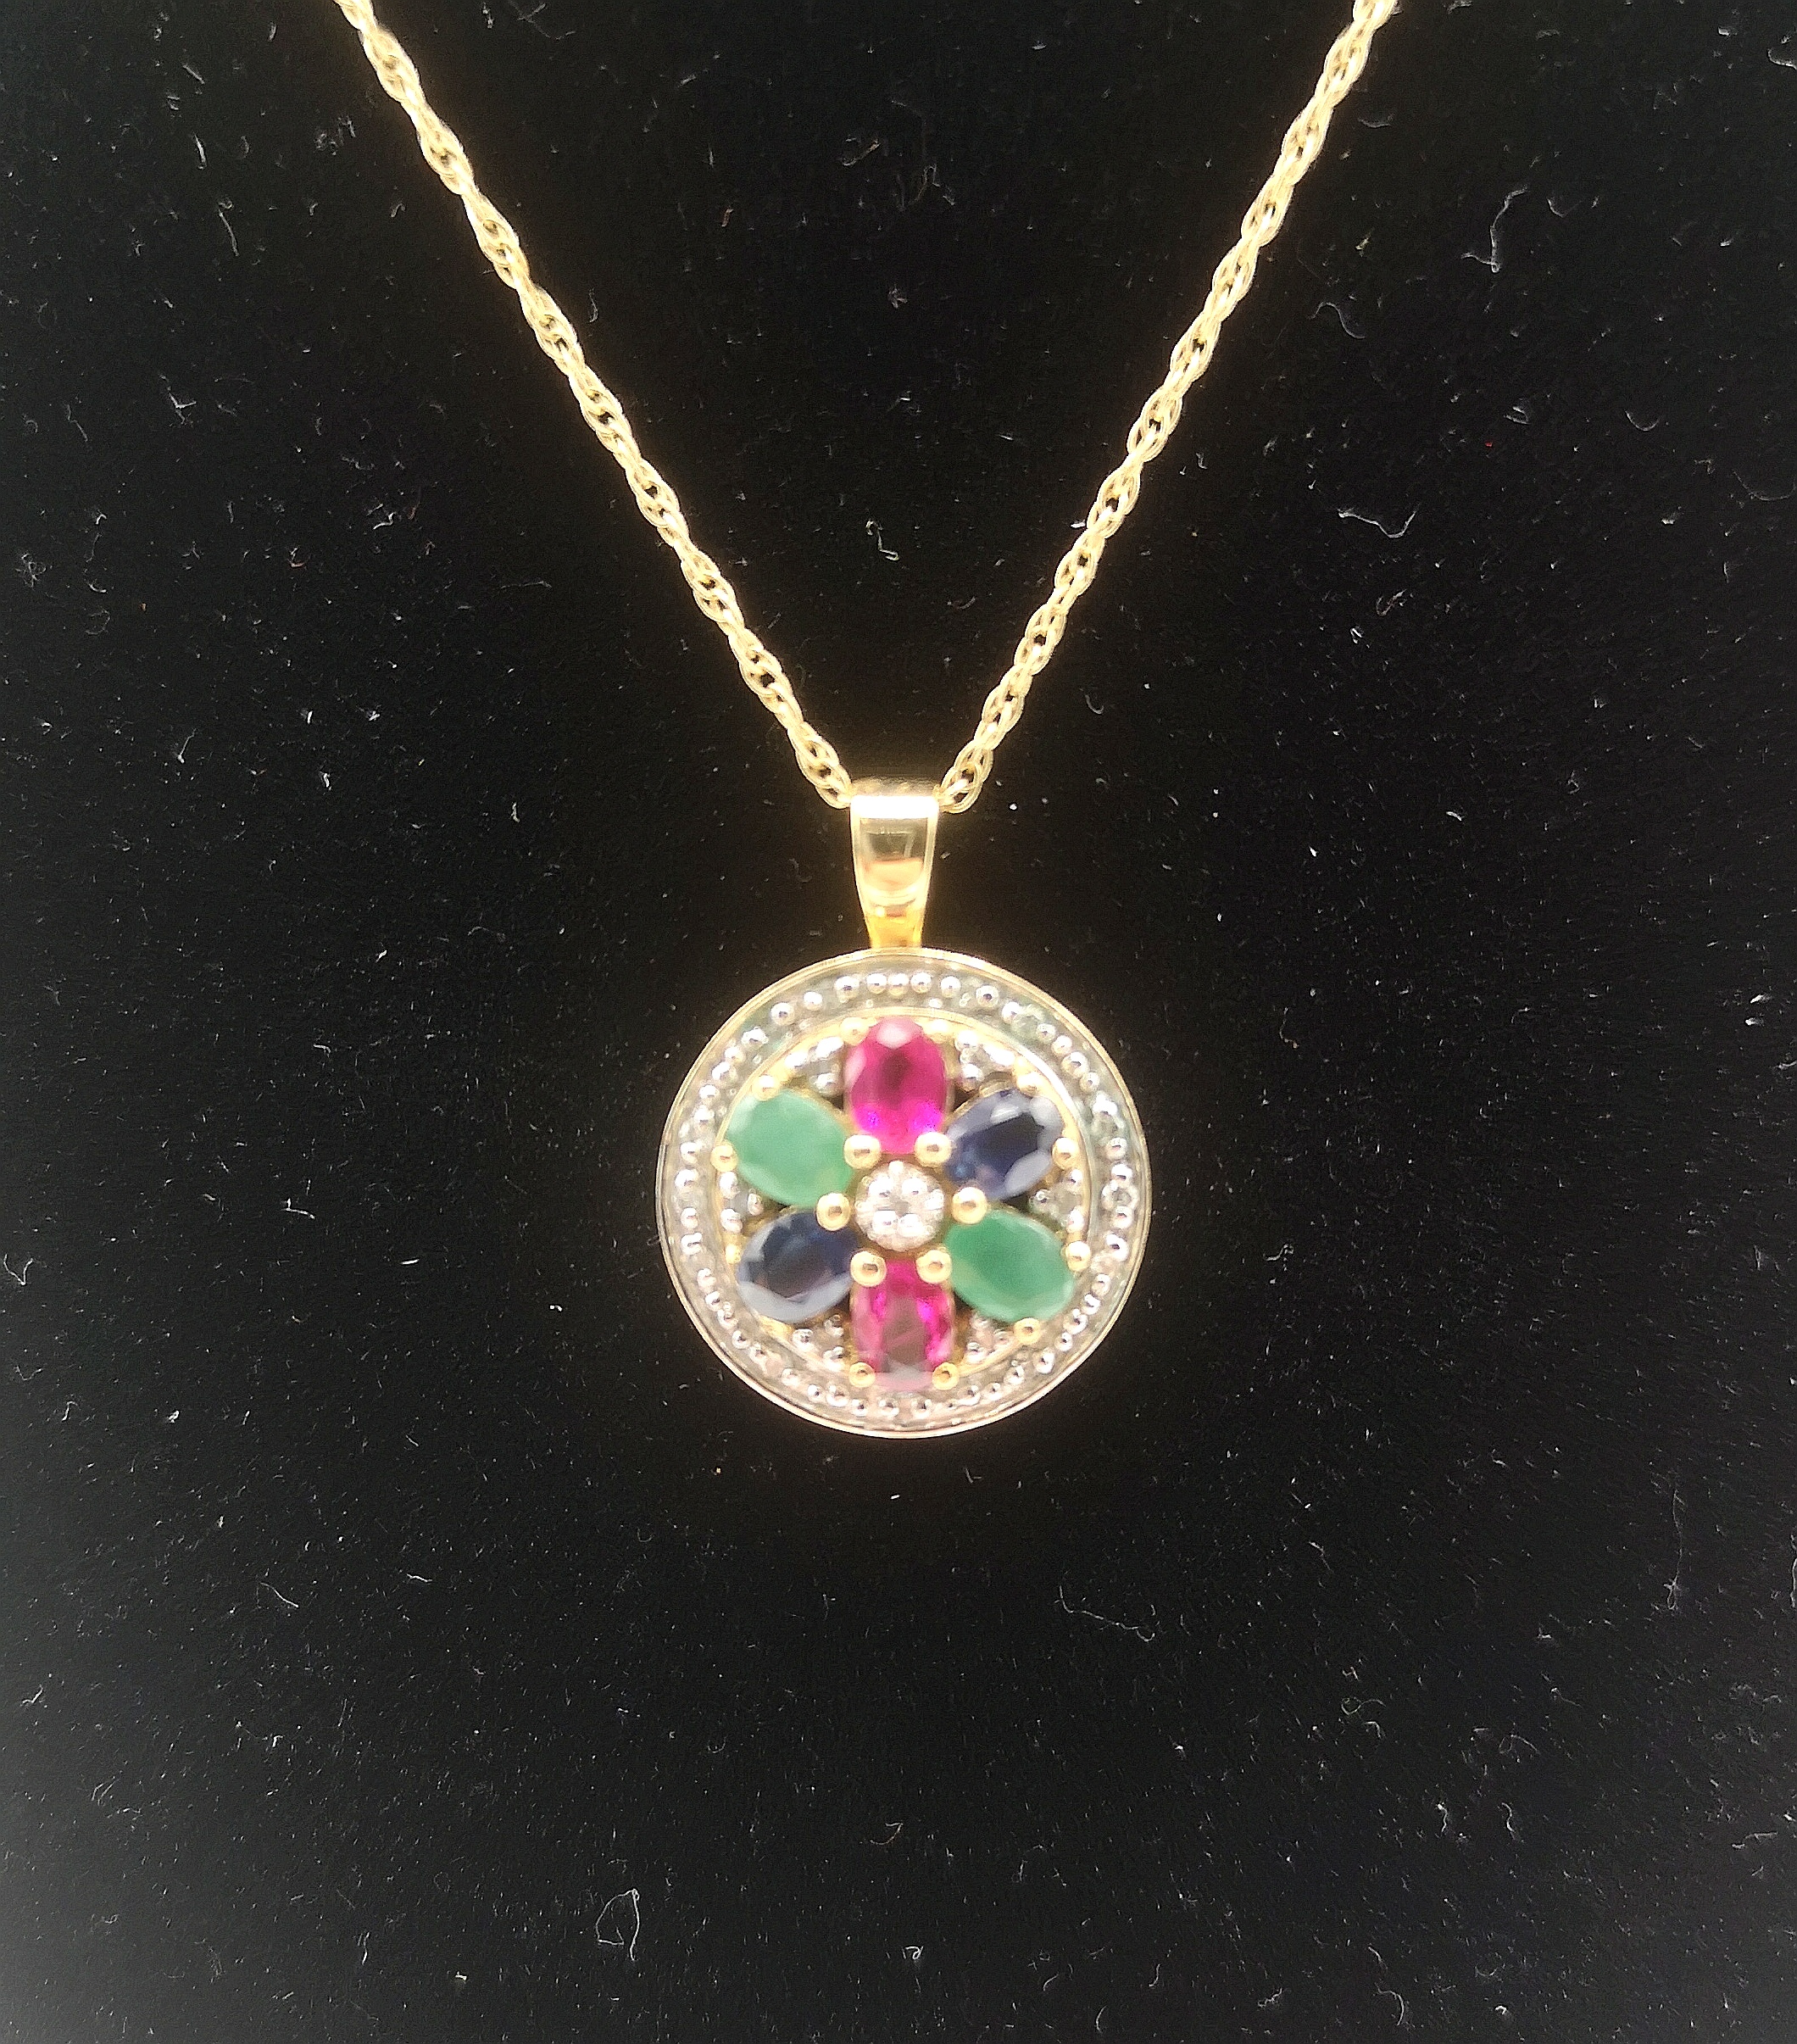 9ct gold pendant set with rubies, emeralds and sapphires - Image 2 of 8